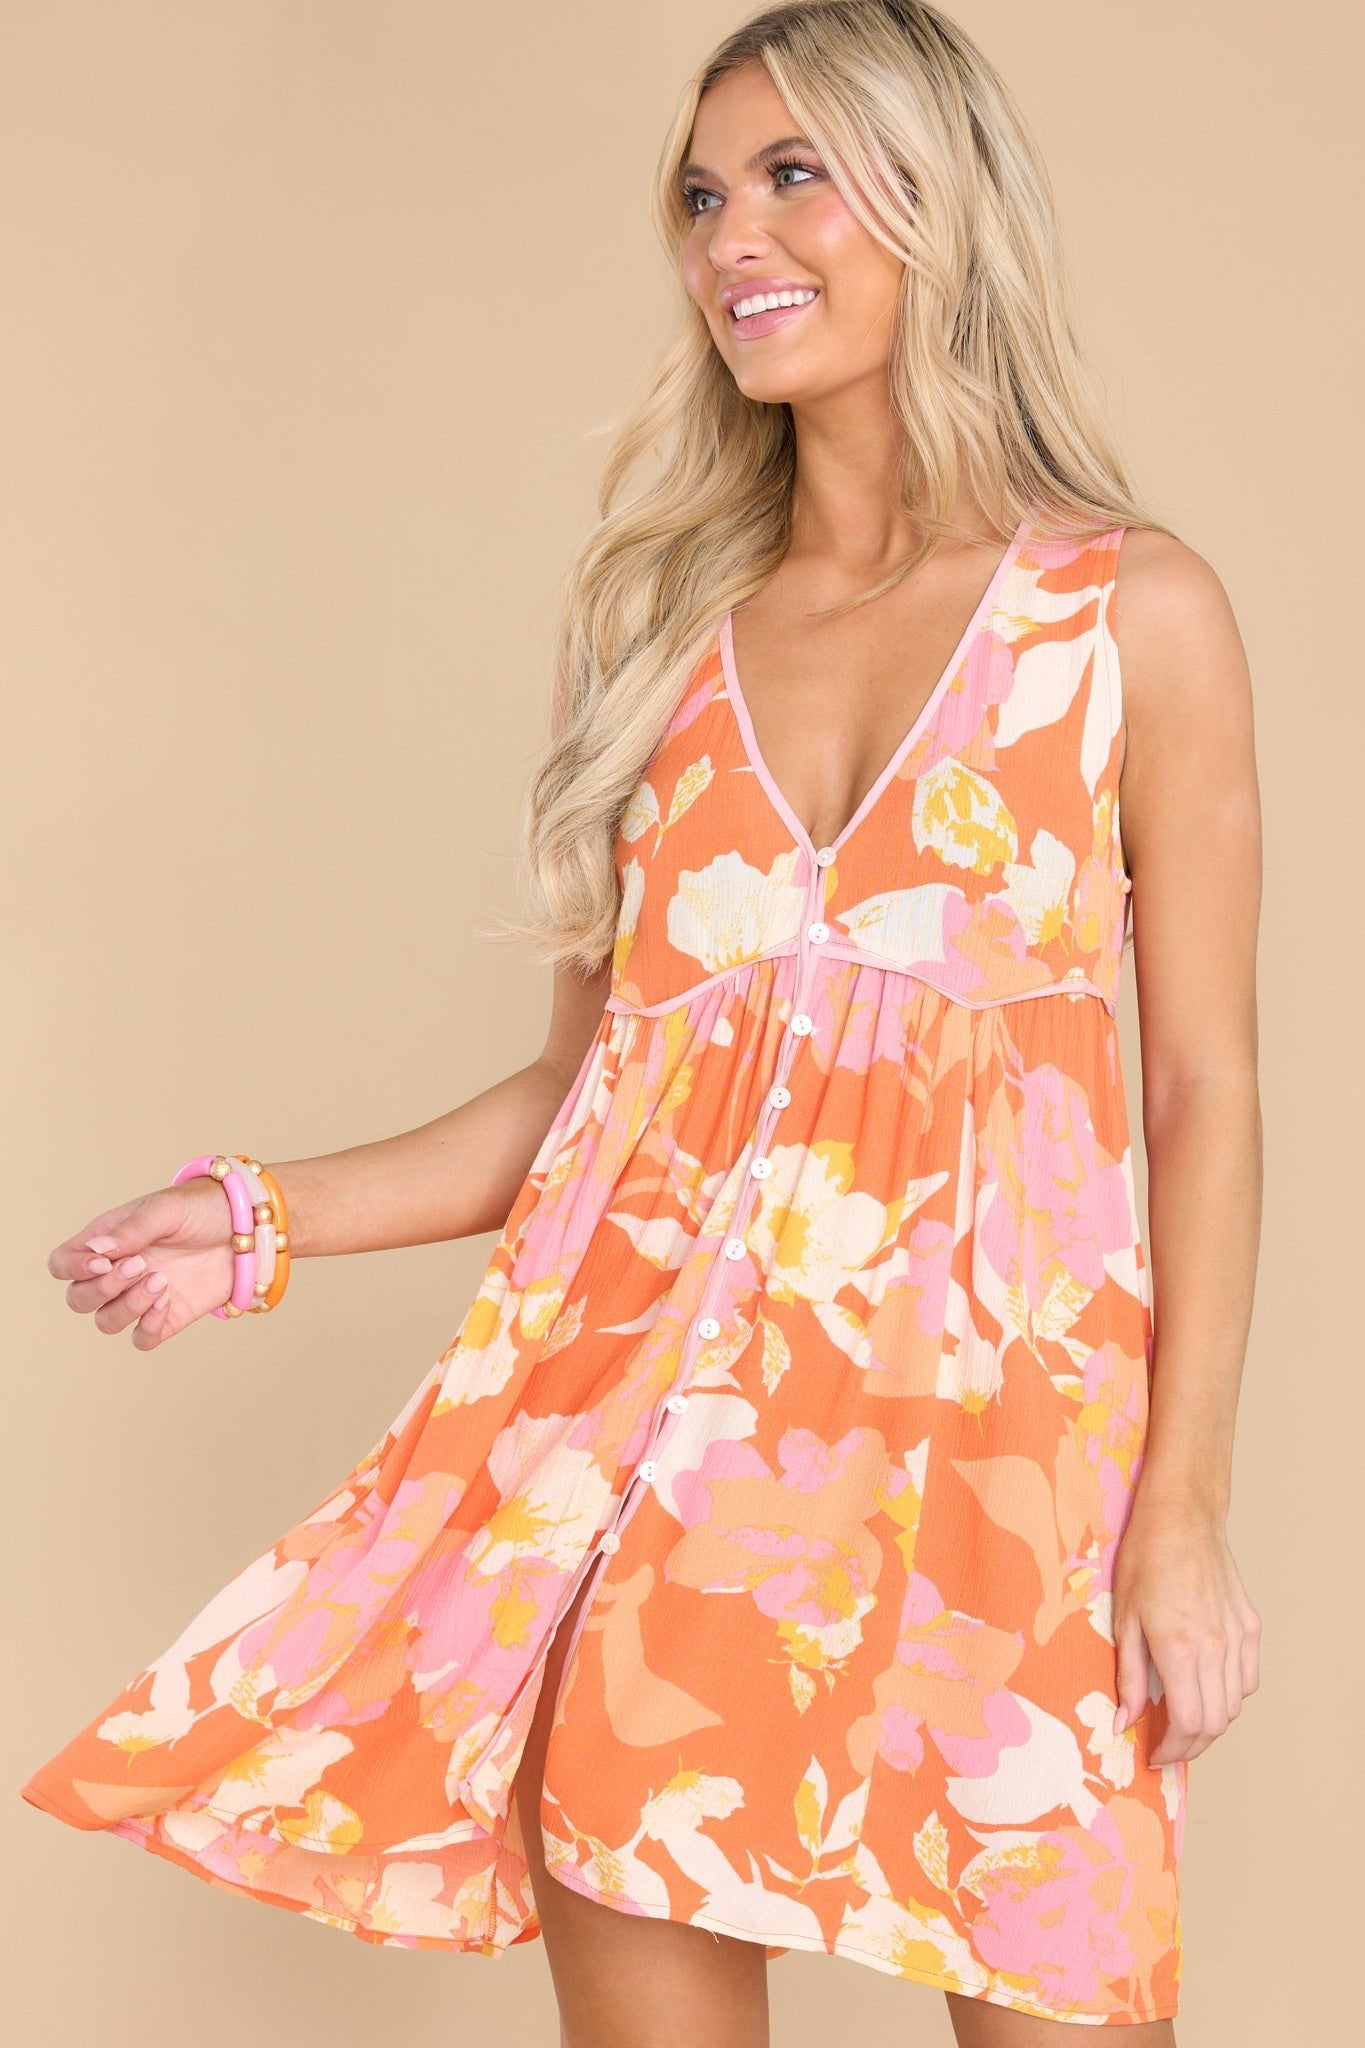 Blooming With Bliss Orange Floral Print Tunic - Red Dress